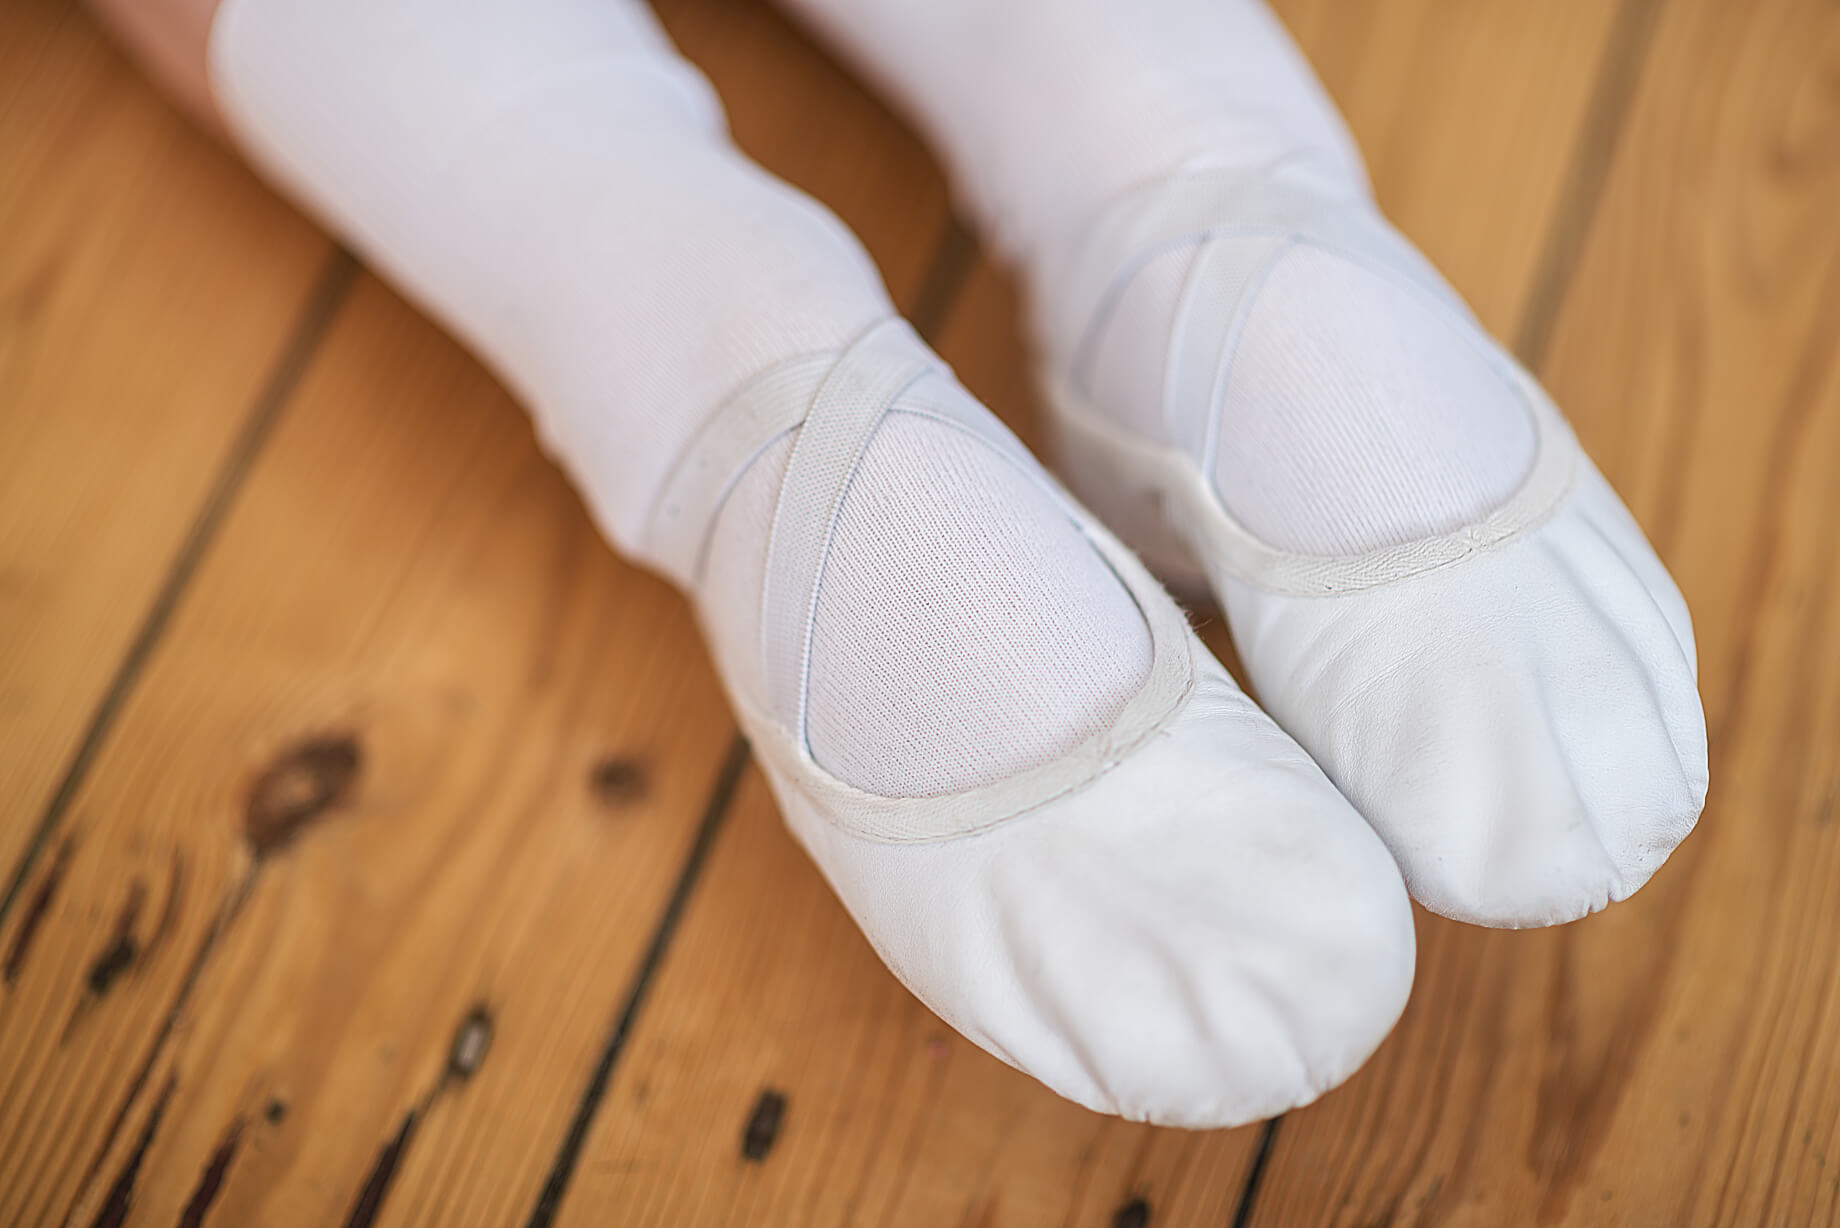 Where To Buy Childrens Ballet Shoes